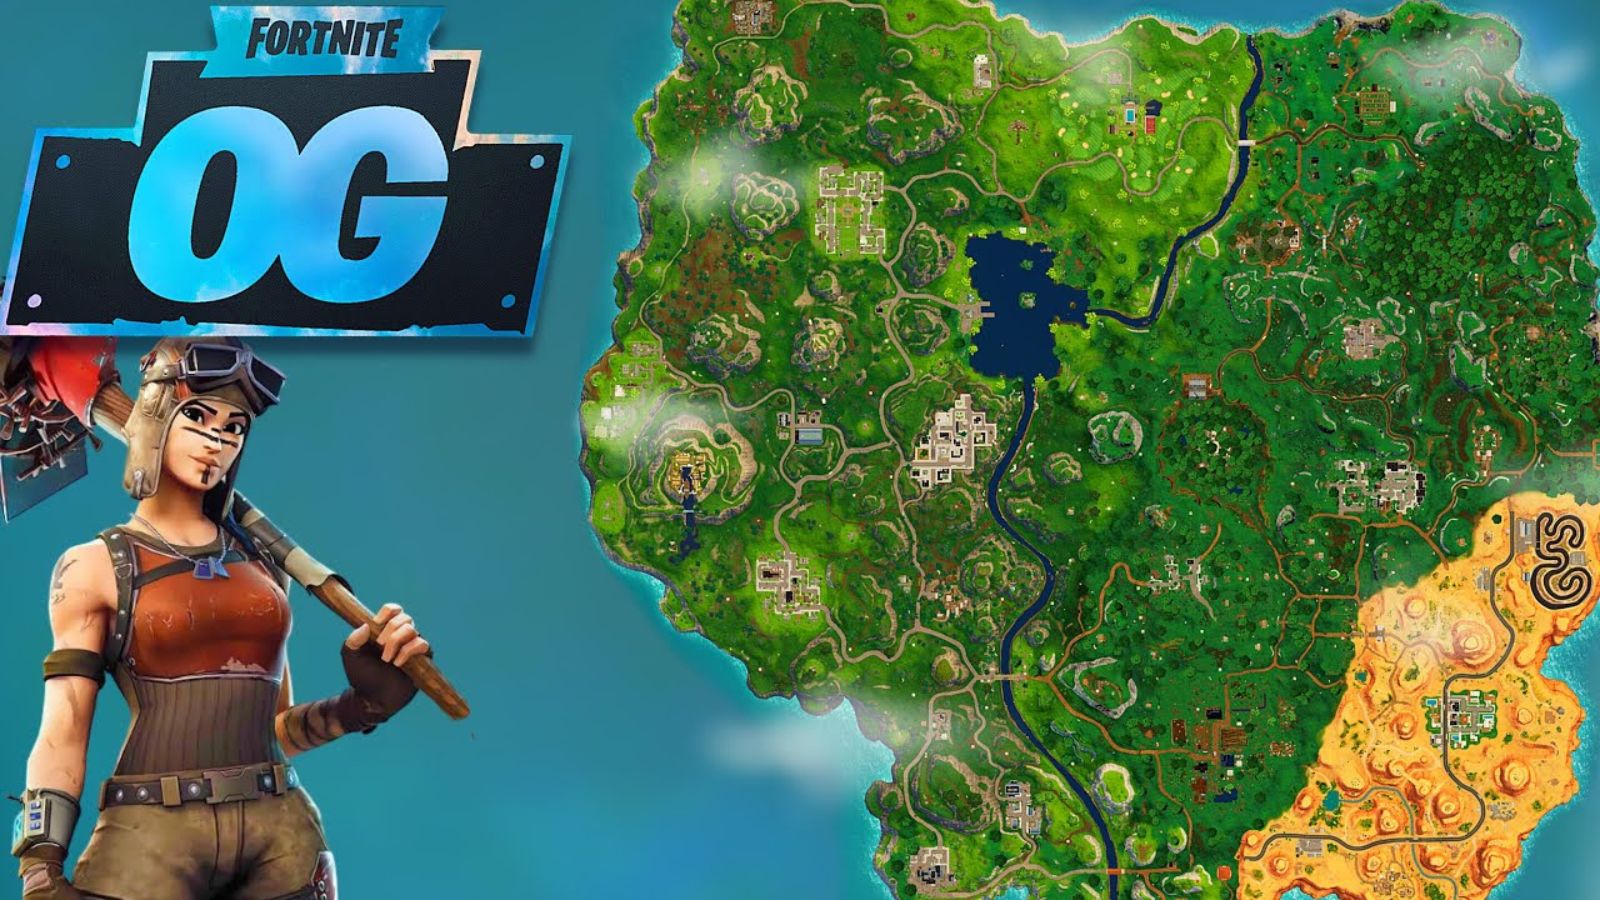 Fortnite Play Your Way lets you earn free loot